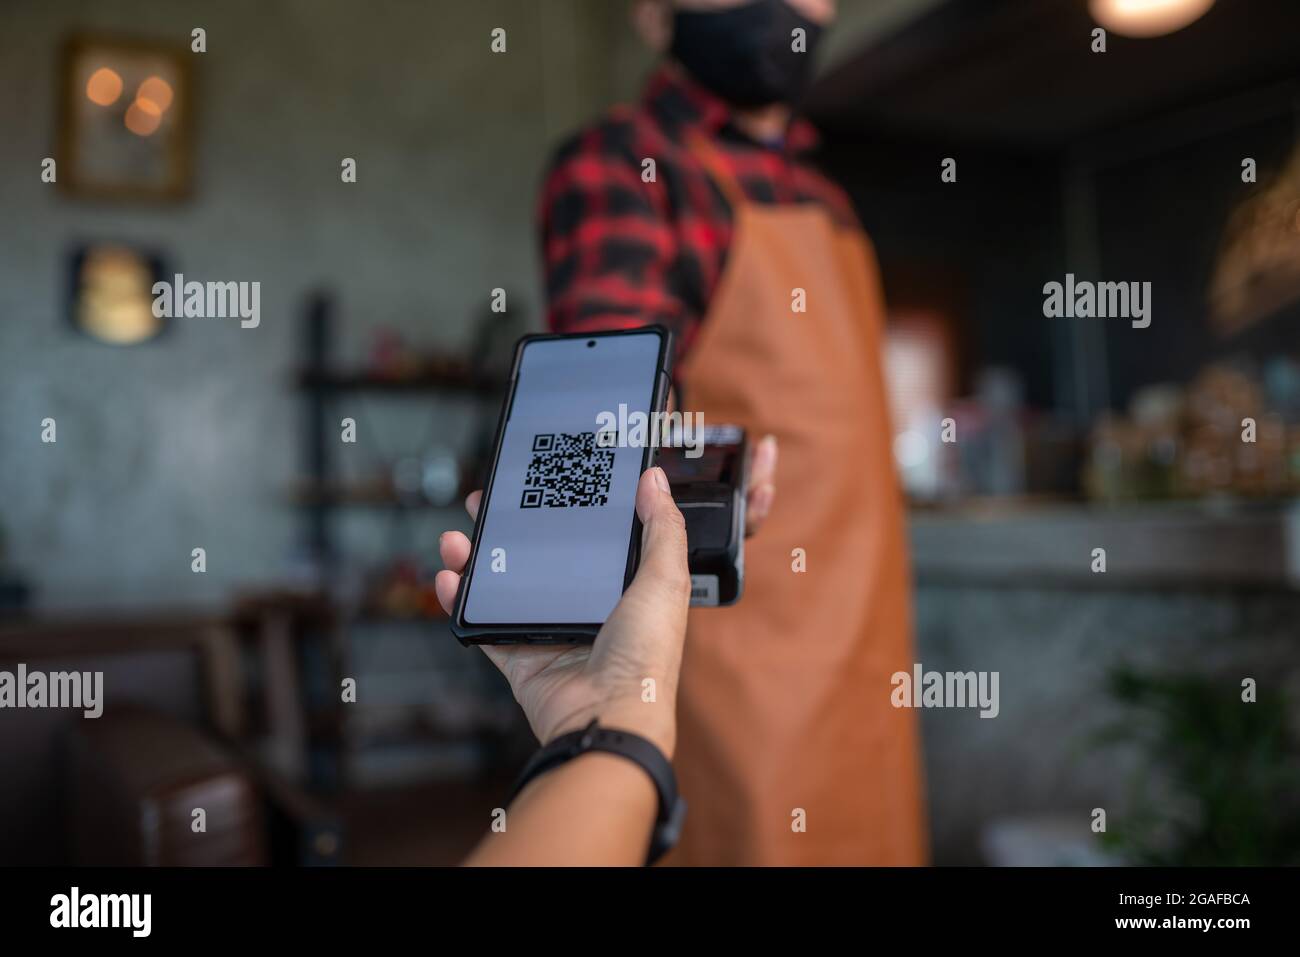 Payment by QR code via credit card swipe machine at the cafe Stock Photo